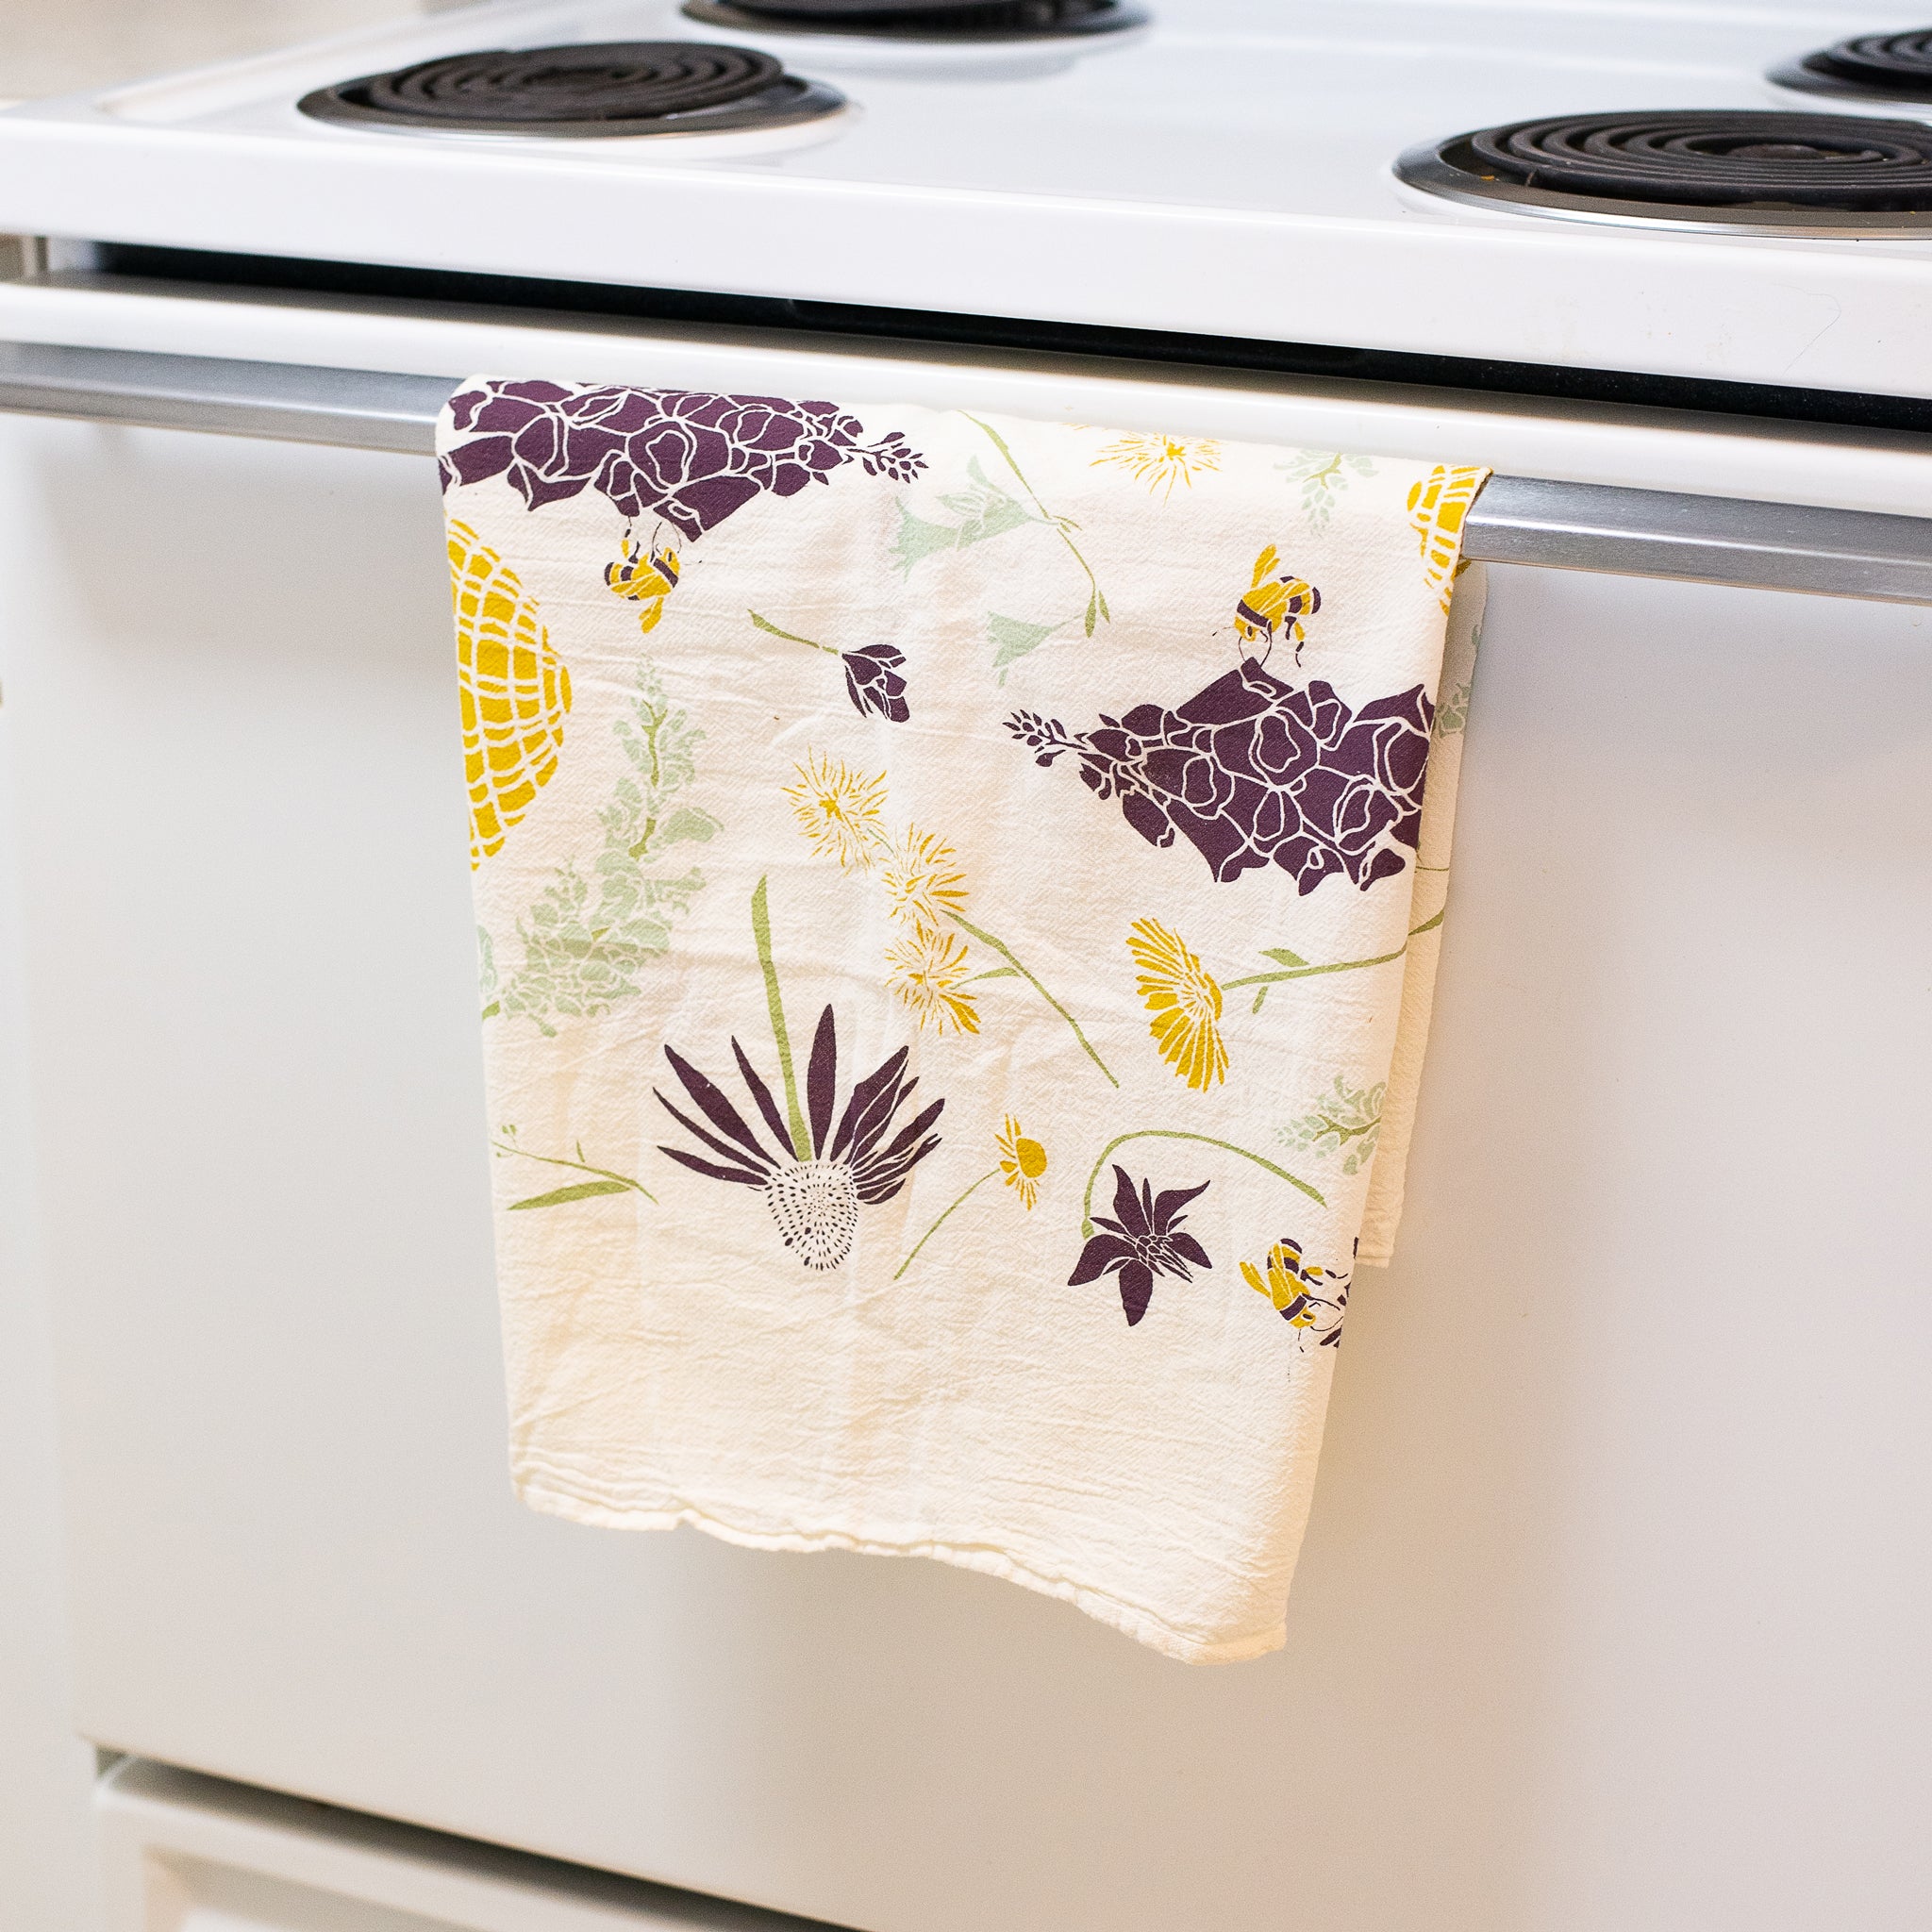 Large Natural Kitchen Towels - 5 Styles